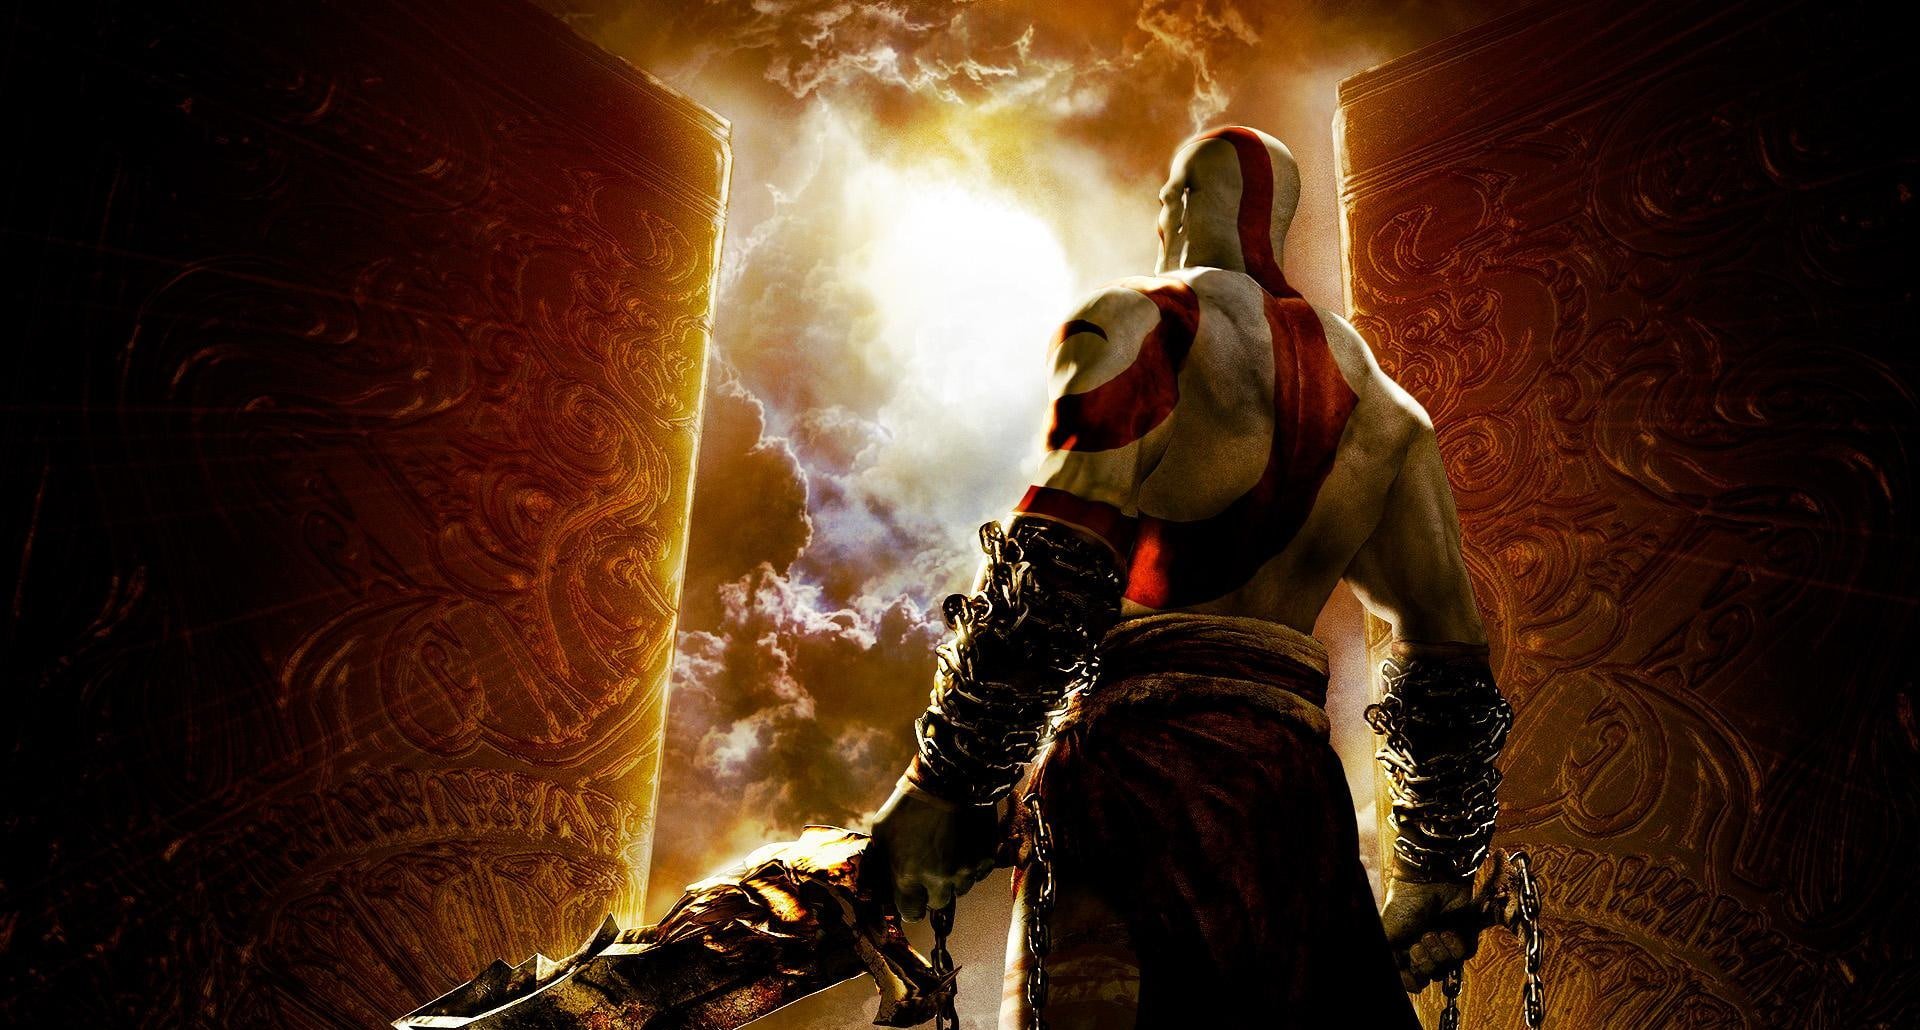 God of War: Chains of Olympus | Source: Wallpaper Flare